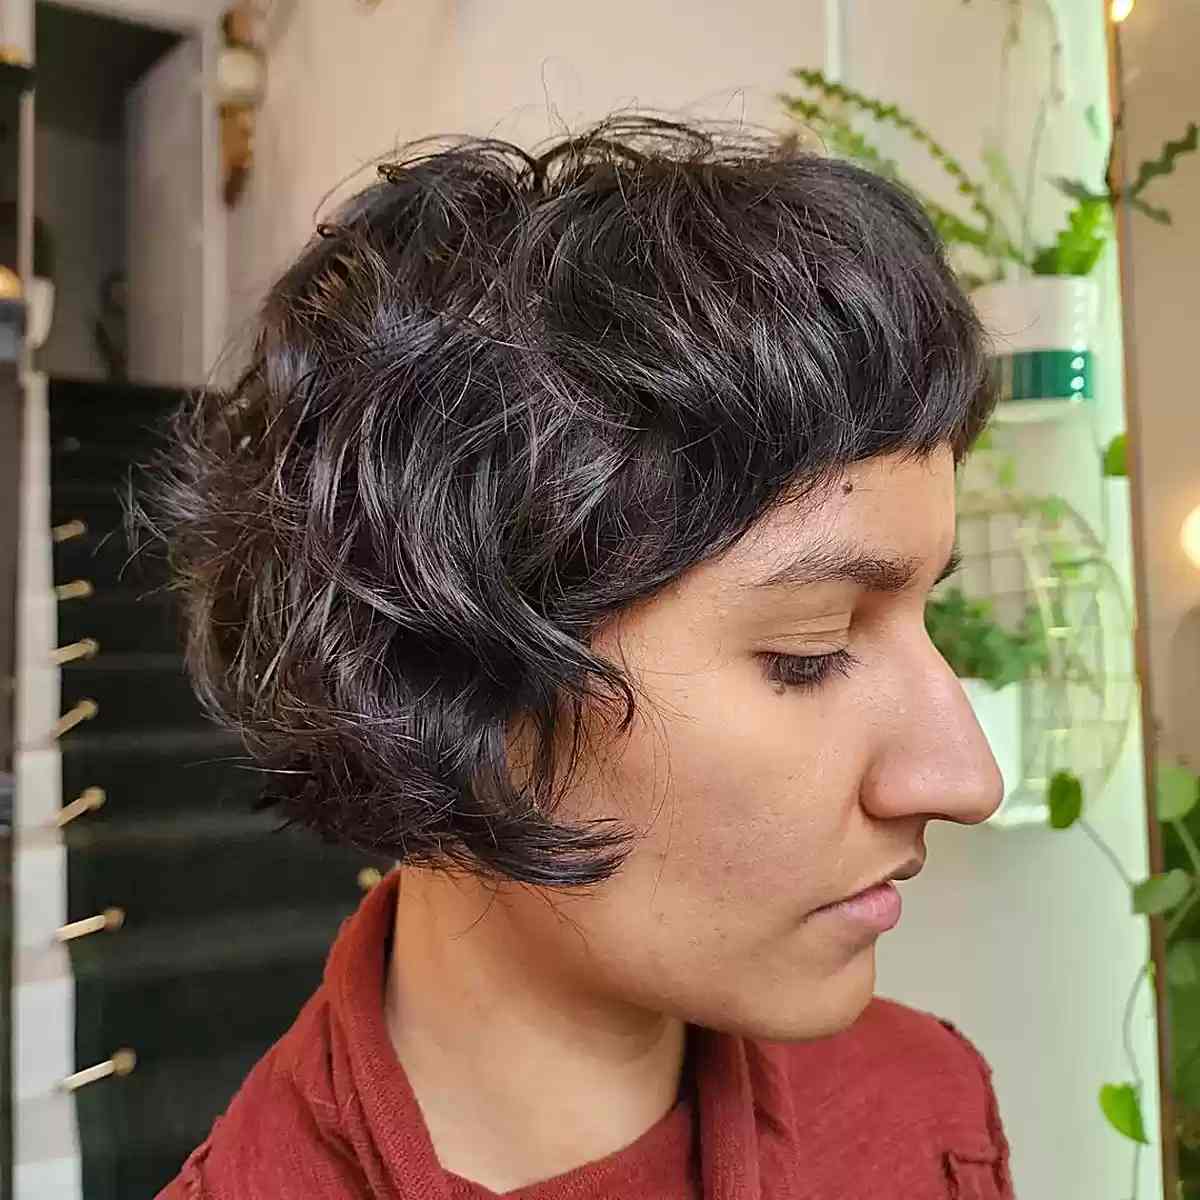 Super Short French Bob with Swoopy Layers